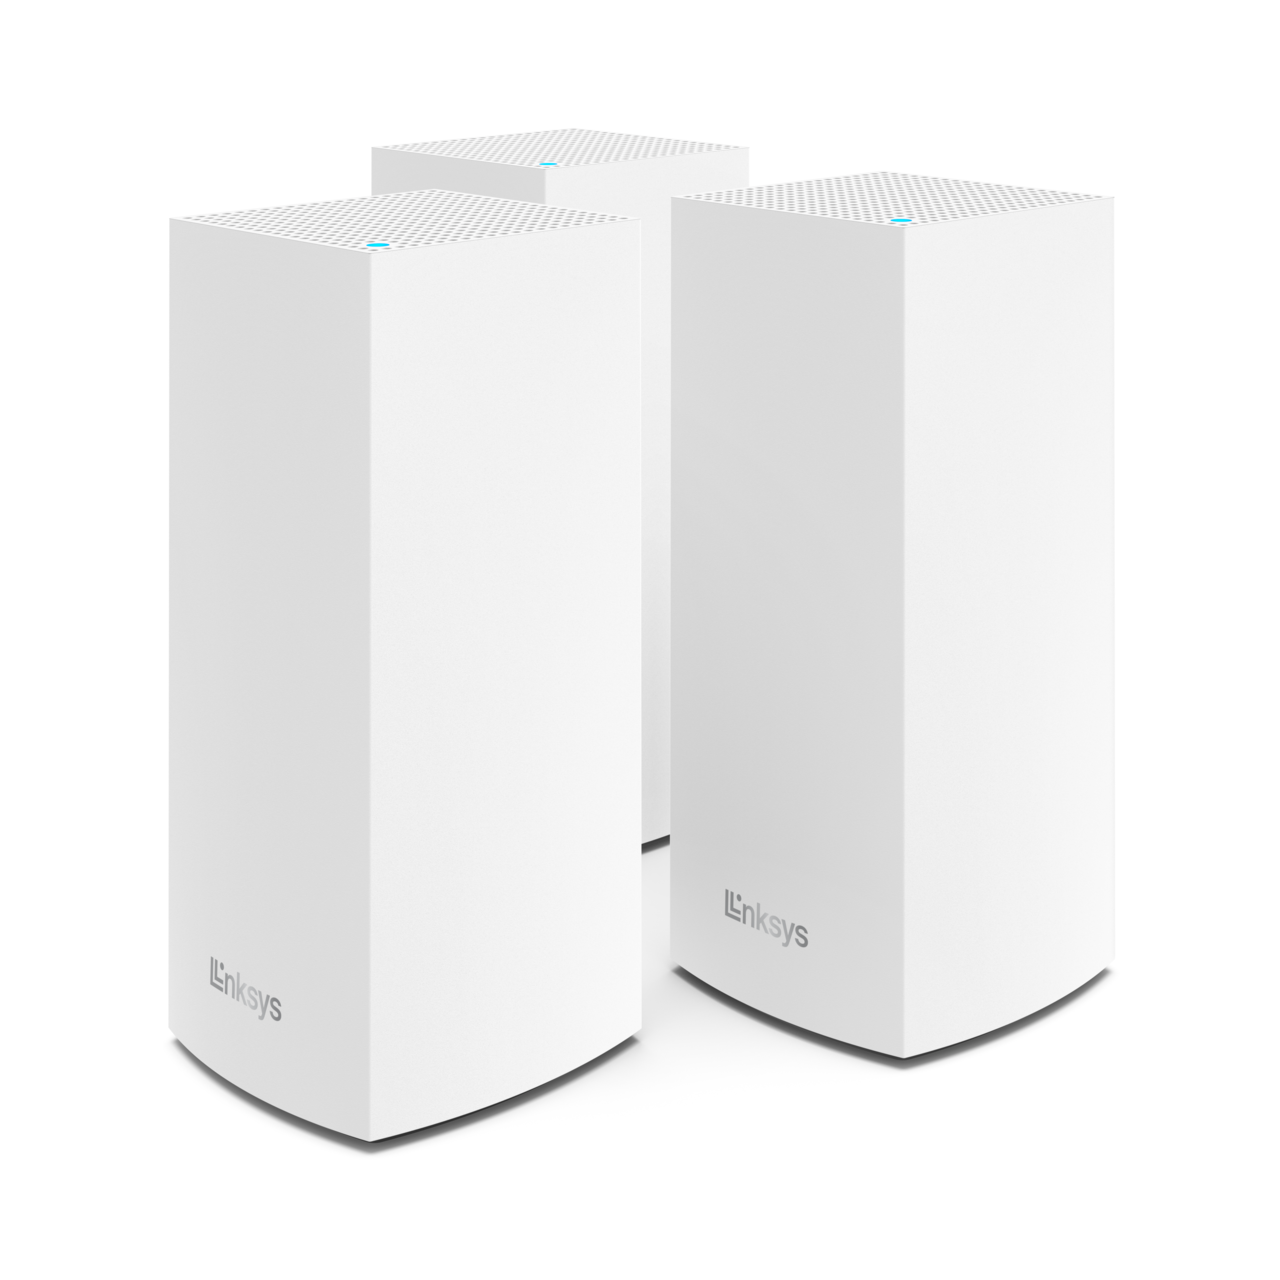 Linksys Launches New Affordable WiFi 6 Mesh System - MacRumors